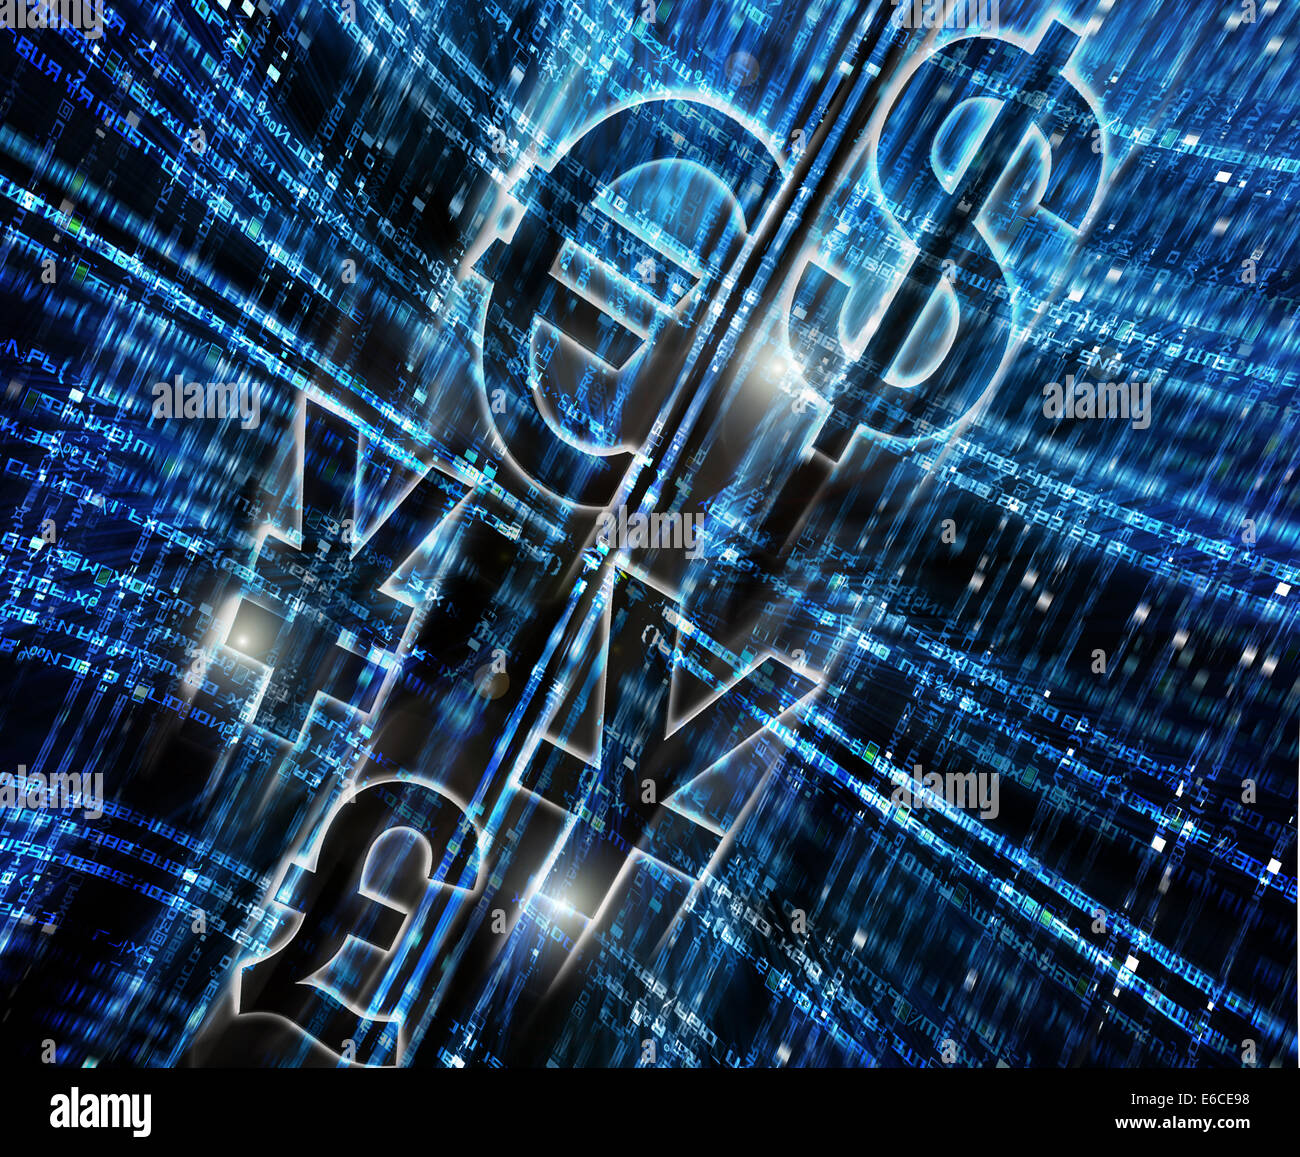 abstract digital background with money symbol Stock Photo